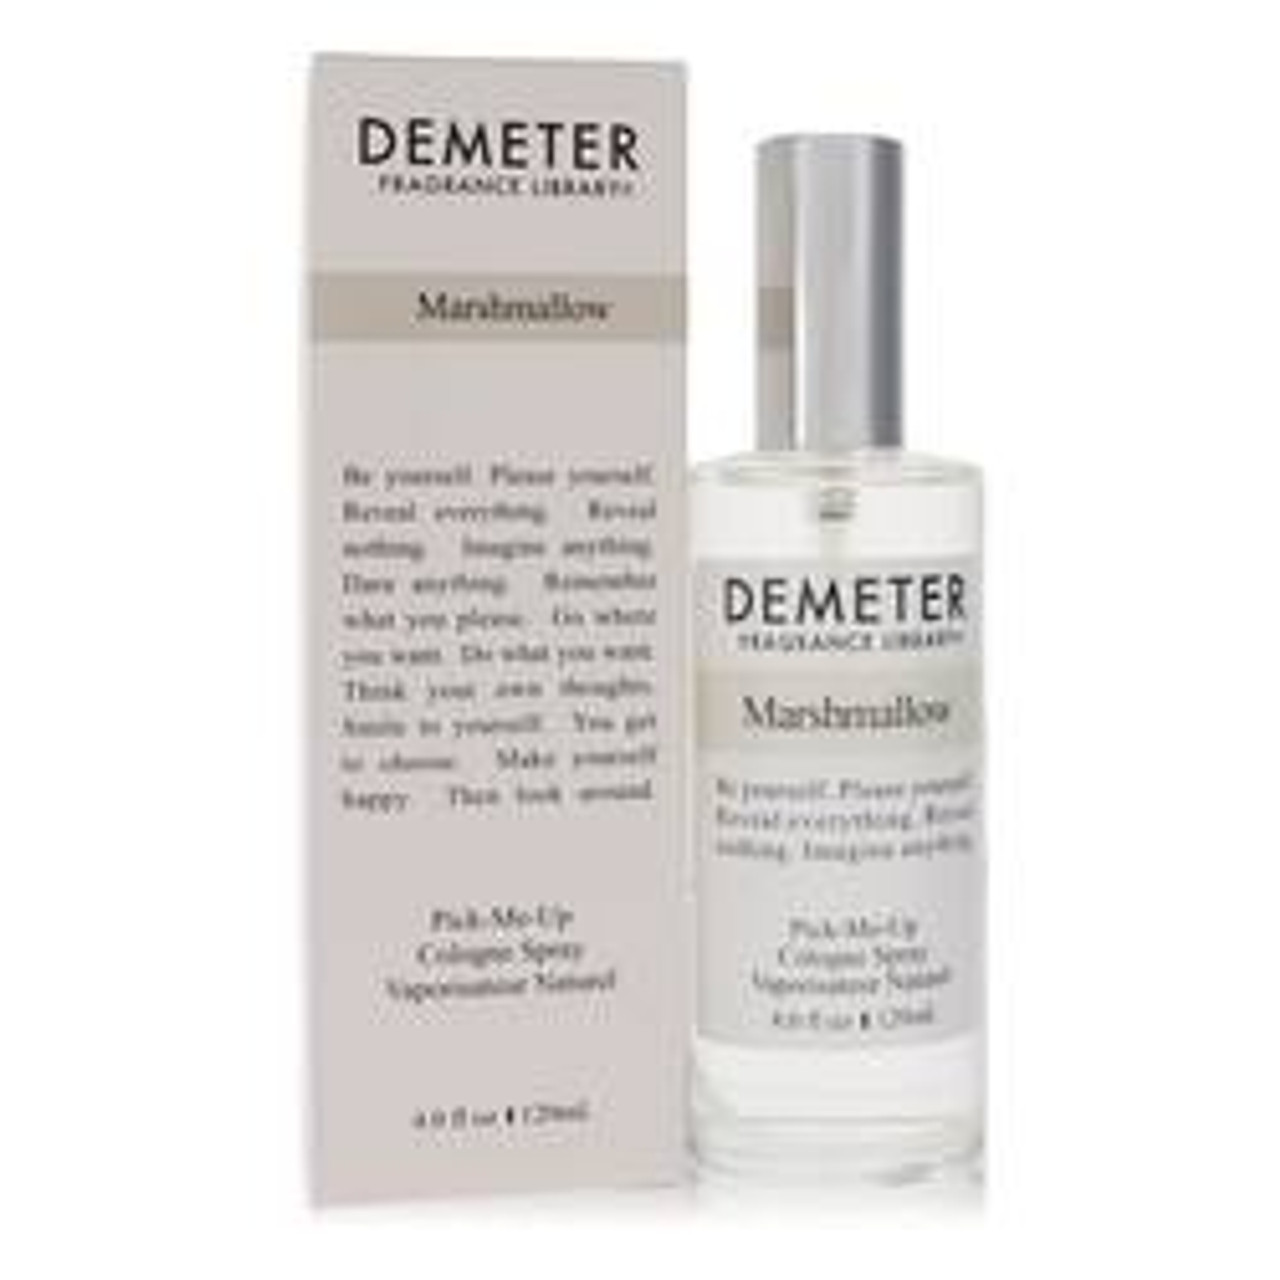 Demeter Marshmallow Perfume By Demeter Cologne Spray 4 oz for Women - [From 79.50 - Choose pk Qty ] - *Ships from Miami